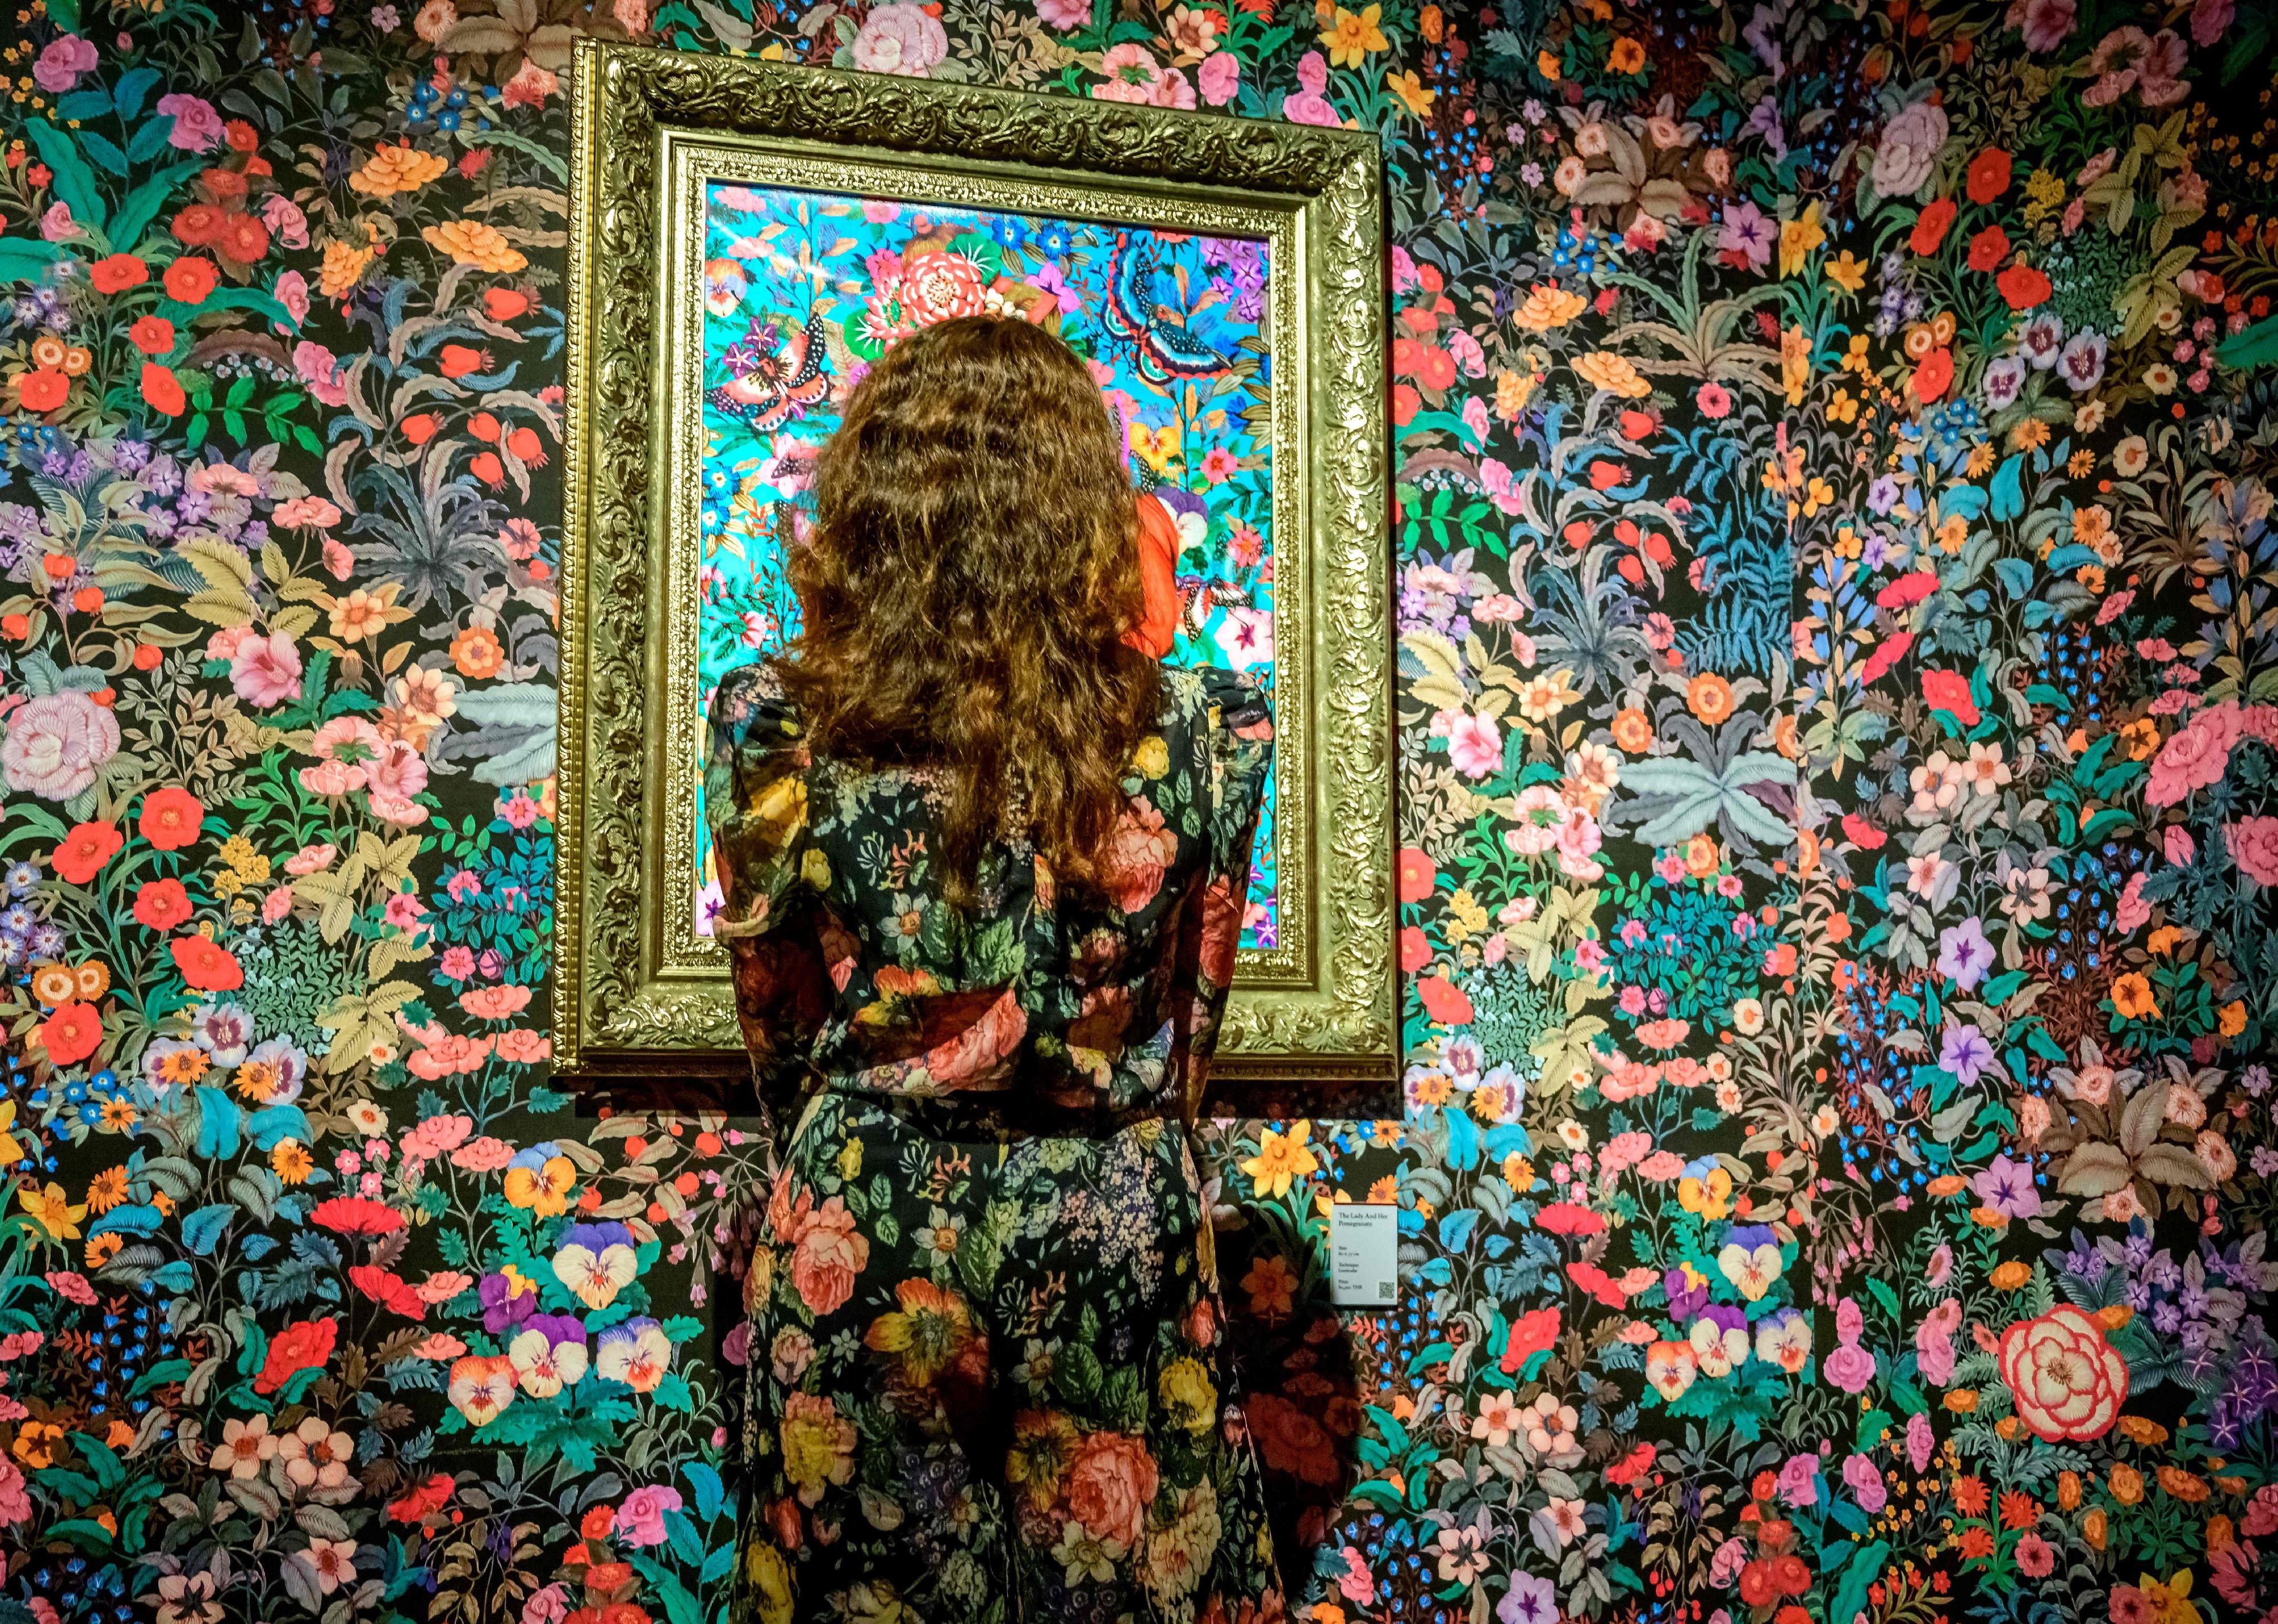 A woman dressed on floral print outfit looking at a painting by artist Phannapast 